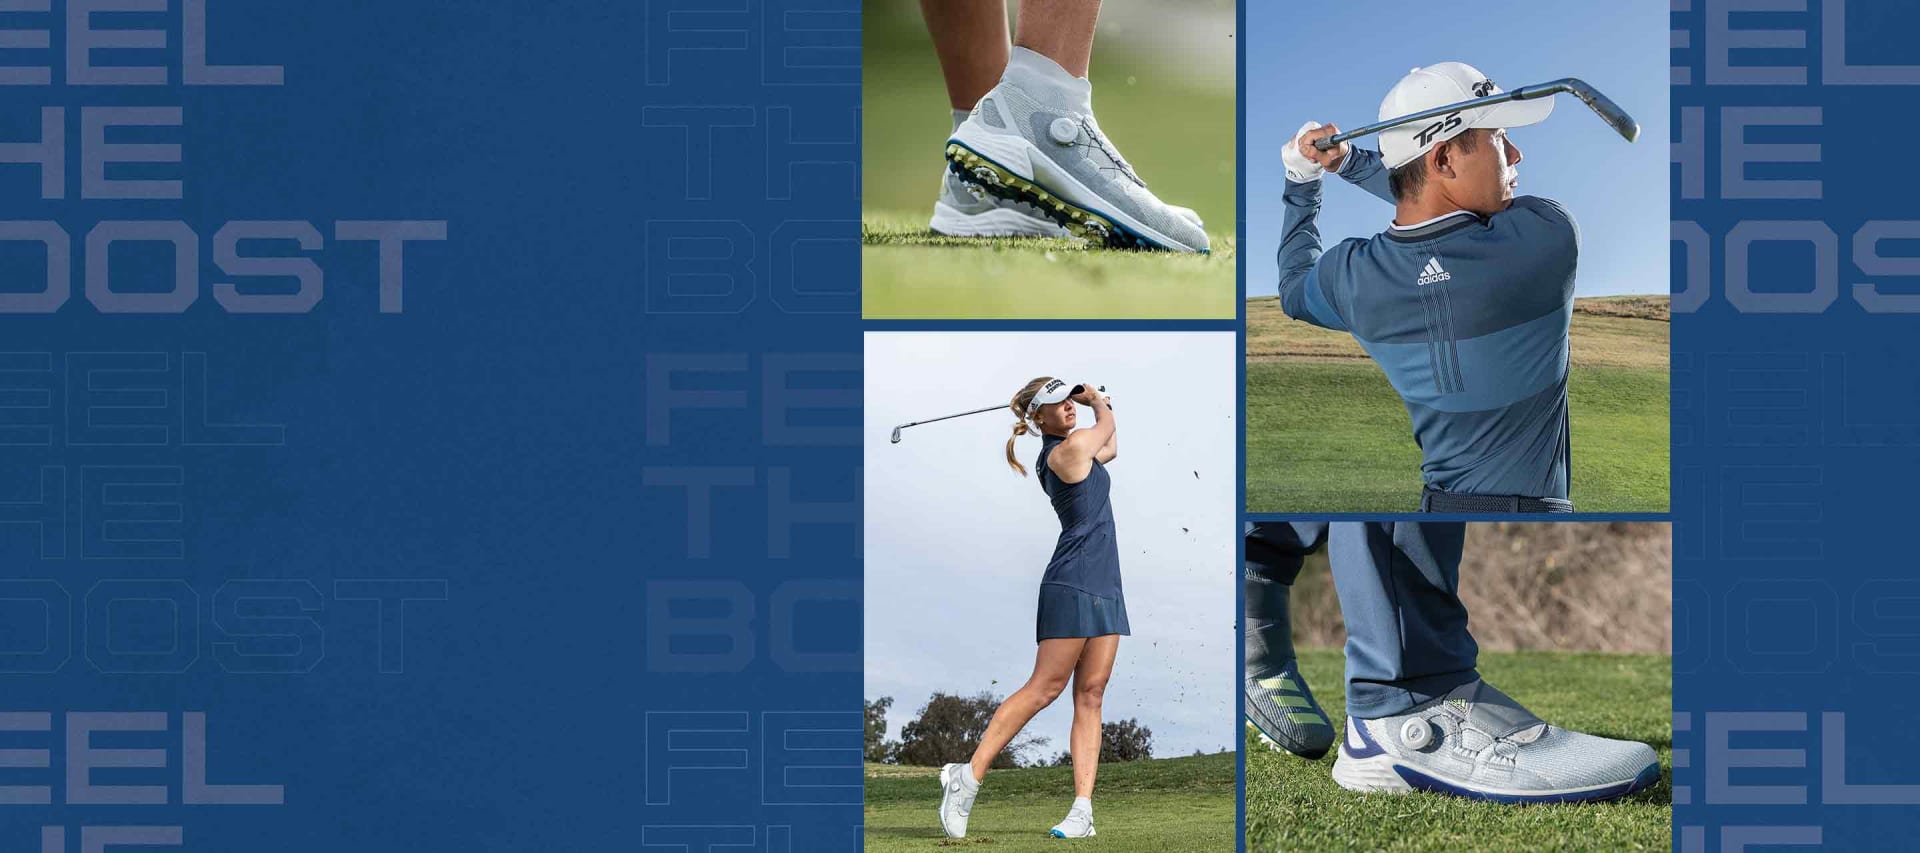 Collage of multiple imagery of men and women playing golf